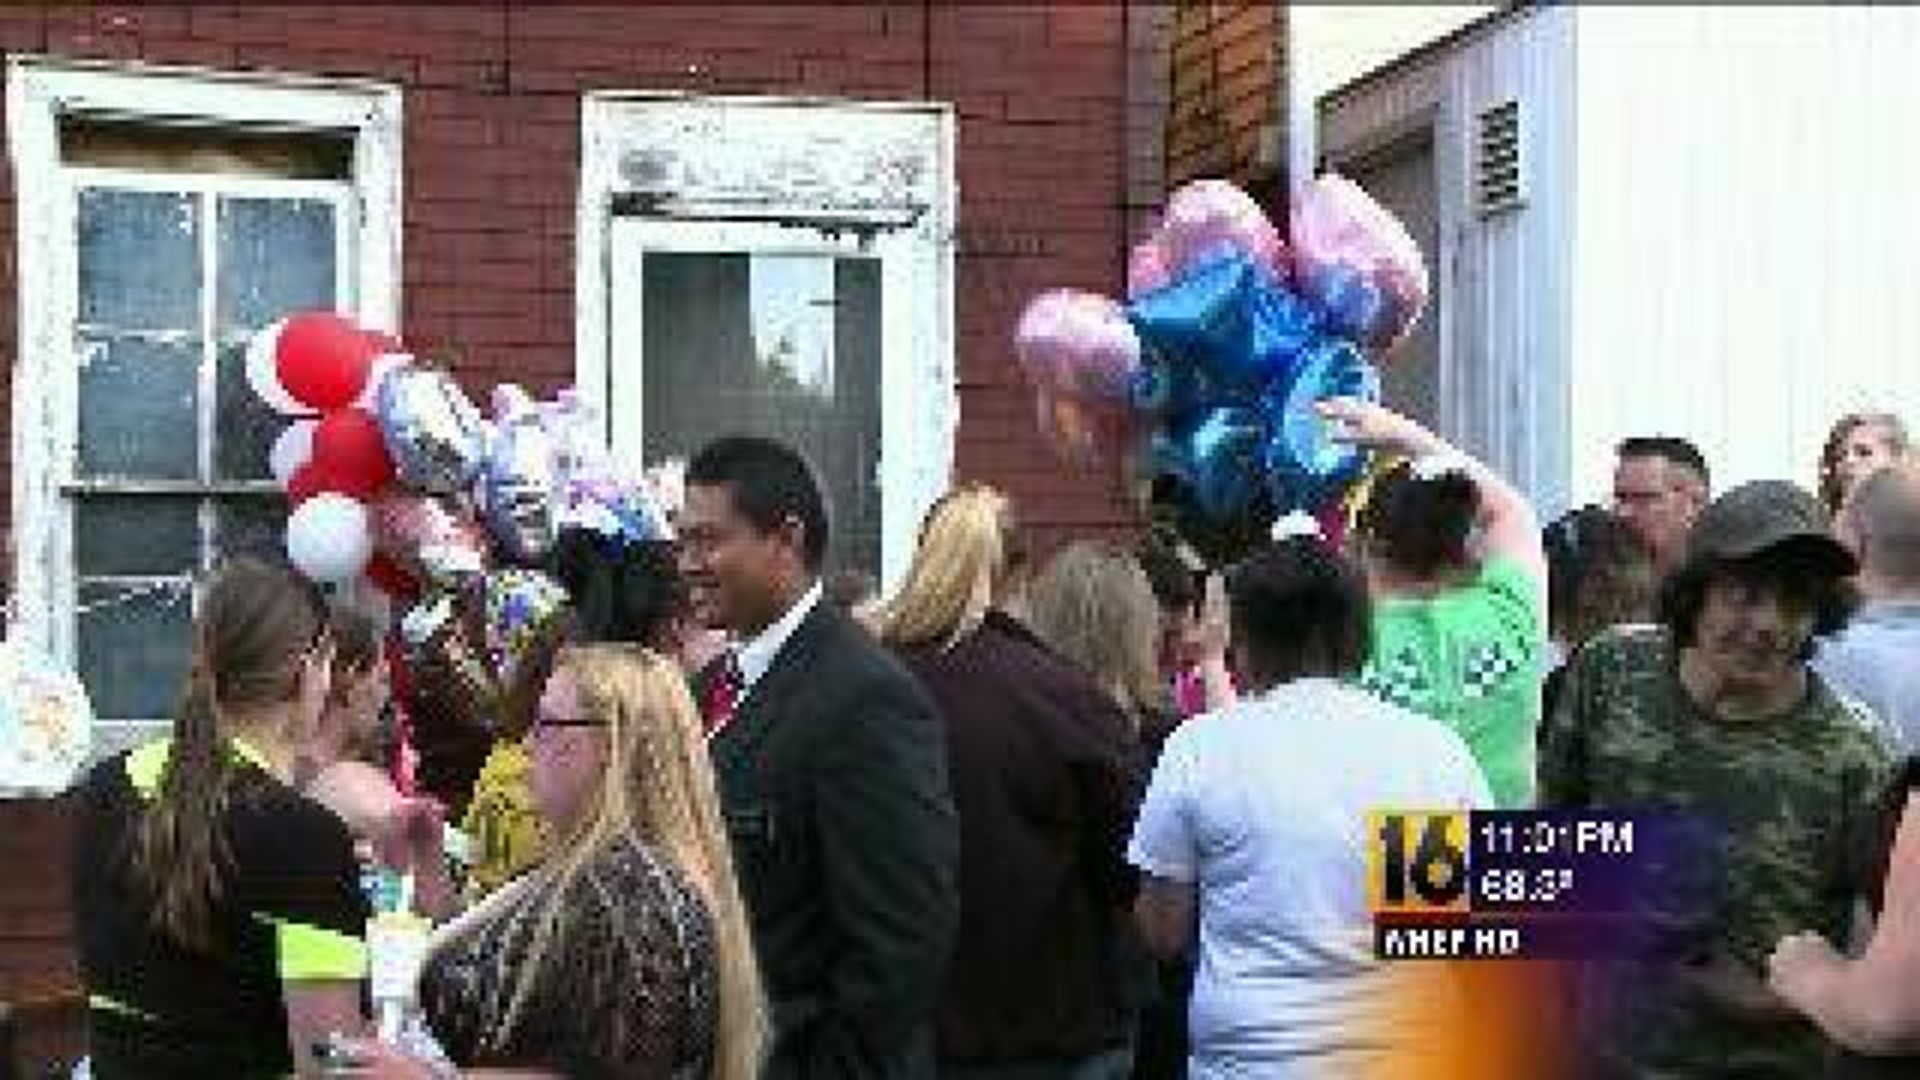 Community of Pottsville Holds Vigil for Fire Victims